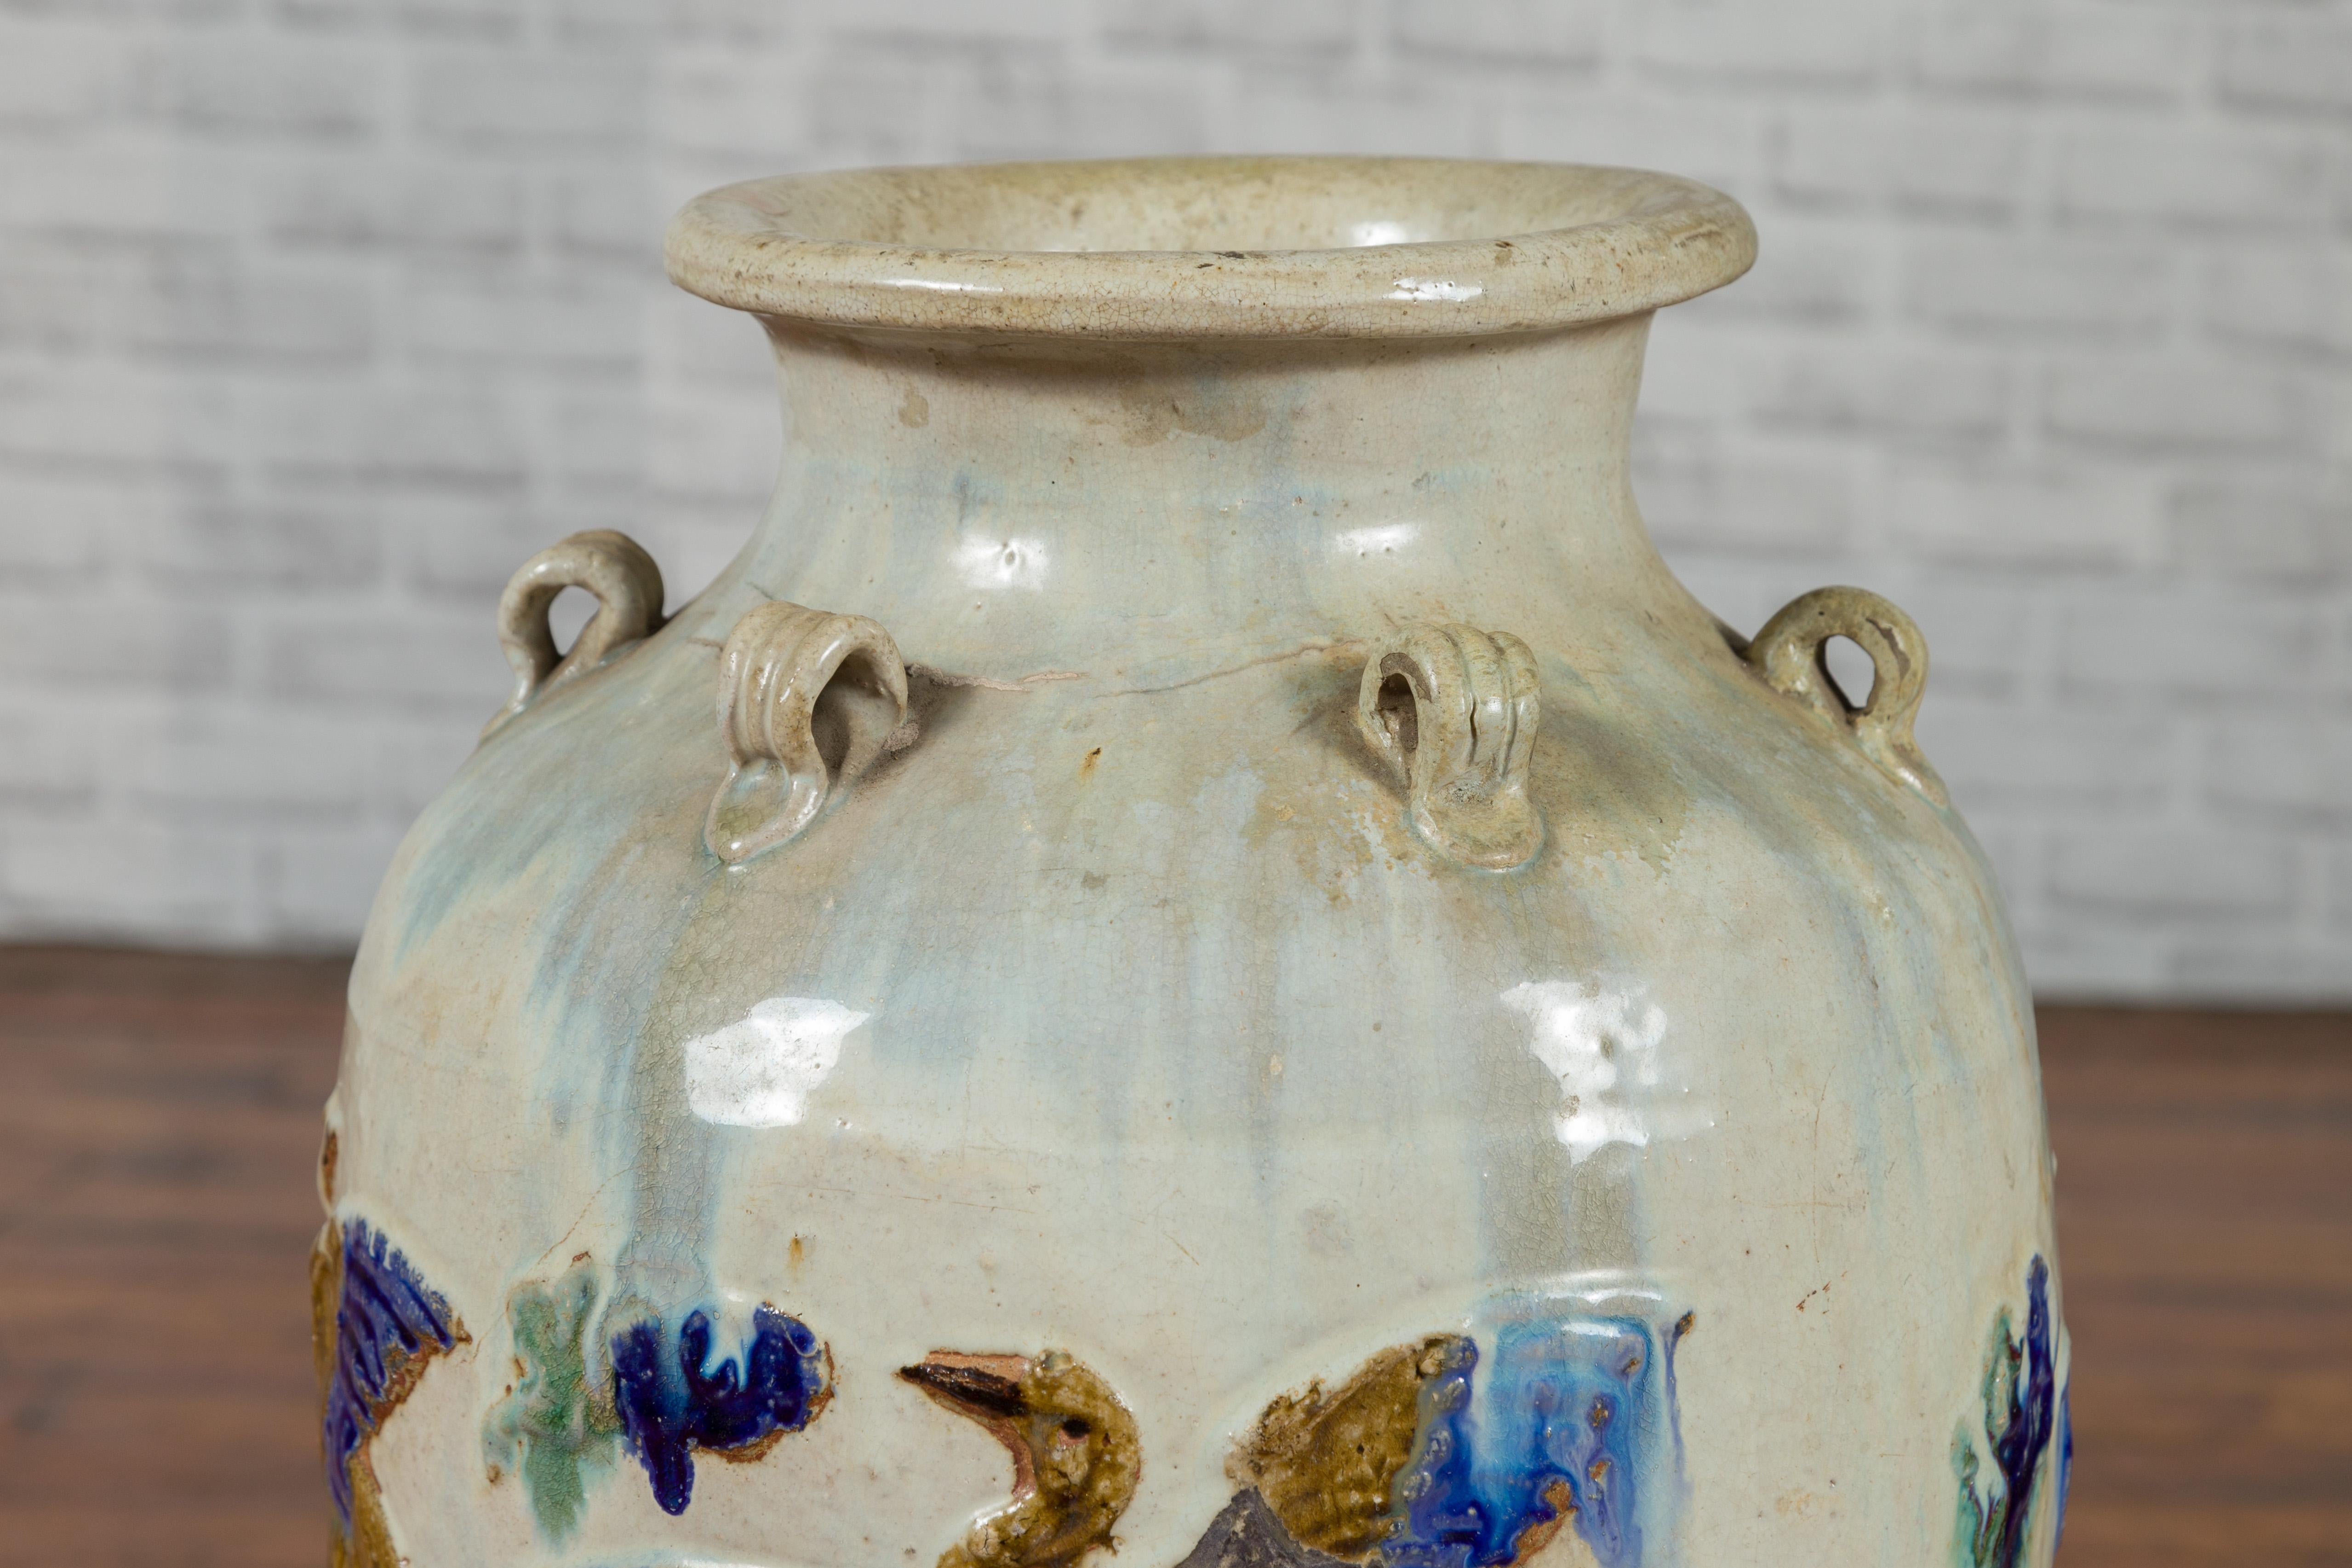 Ceramic 19th Century Martaban Vase with Blue, Green and Brown Bird Motifs and Loops